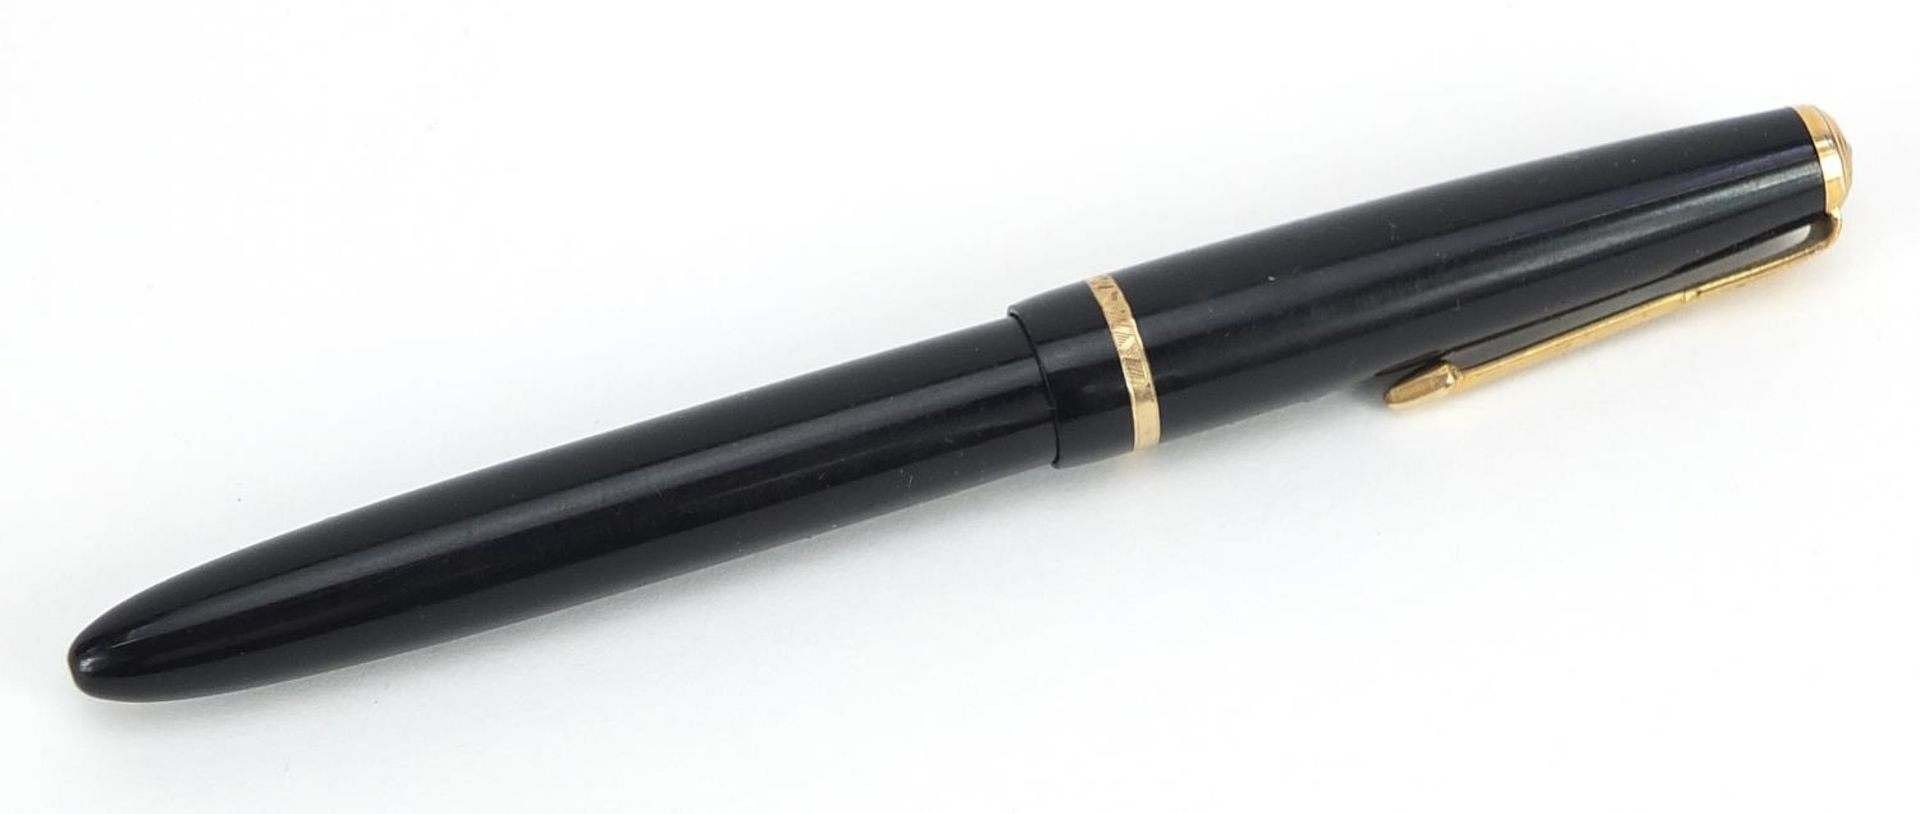 Parker Slimfold fountain pen with 14ct gold nib